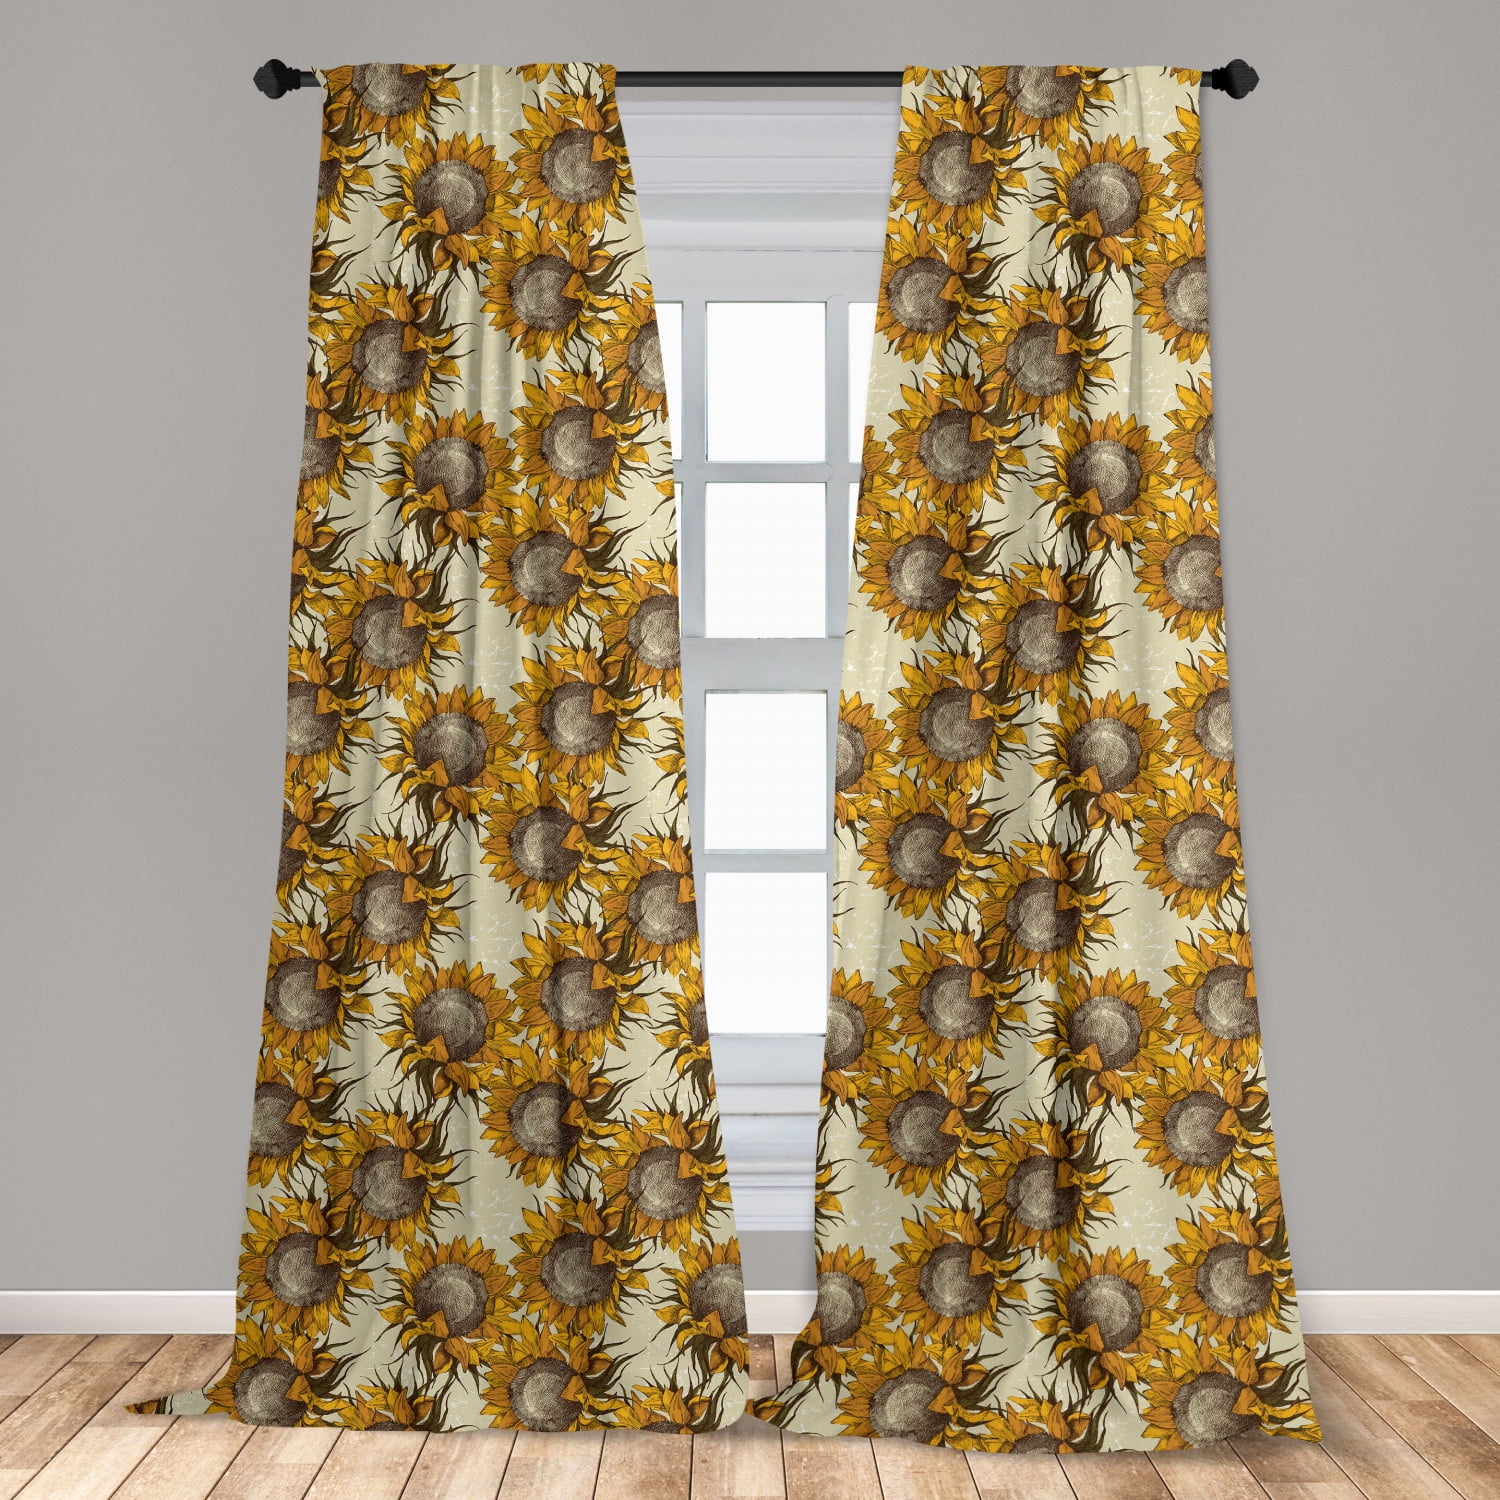 Rose Sunflower Floral Theme Window Drapes Kitchen Curtains 2 Panels 55"x39" New 